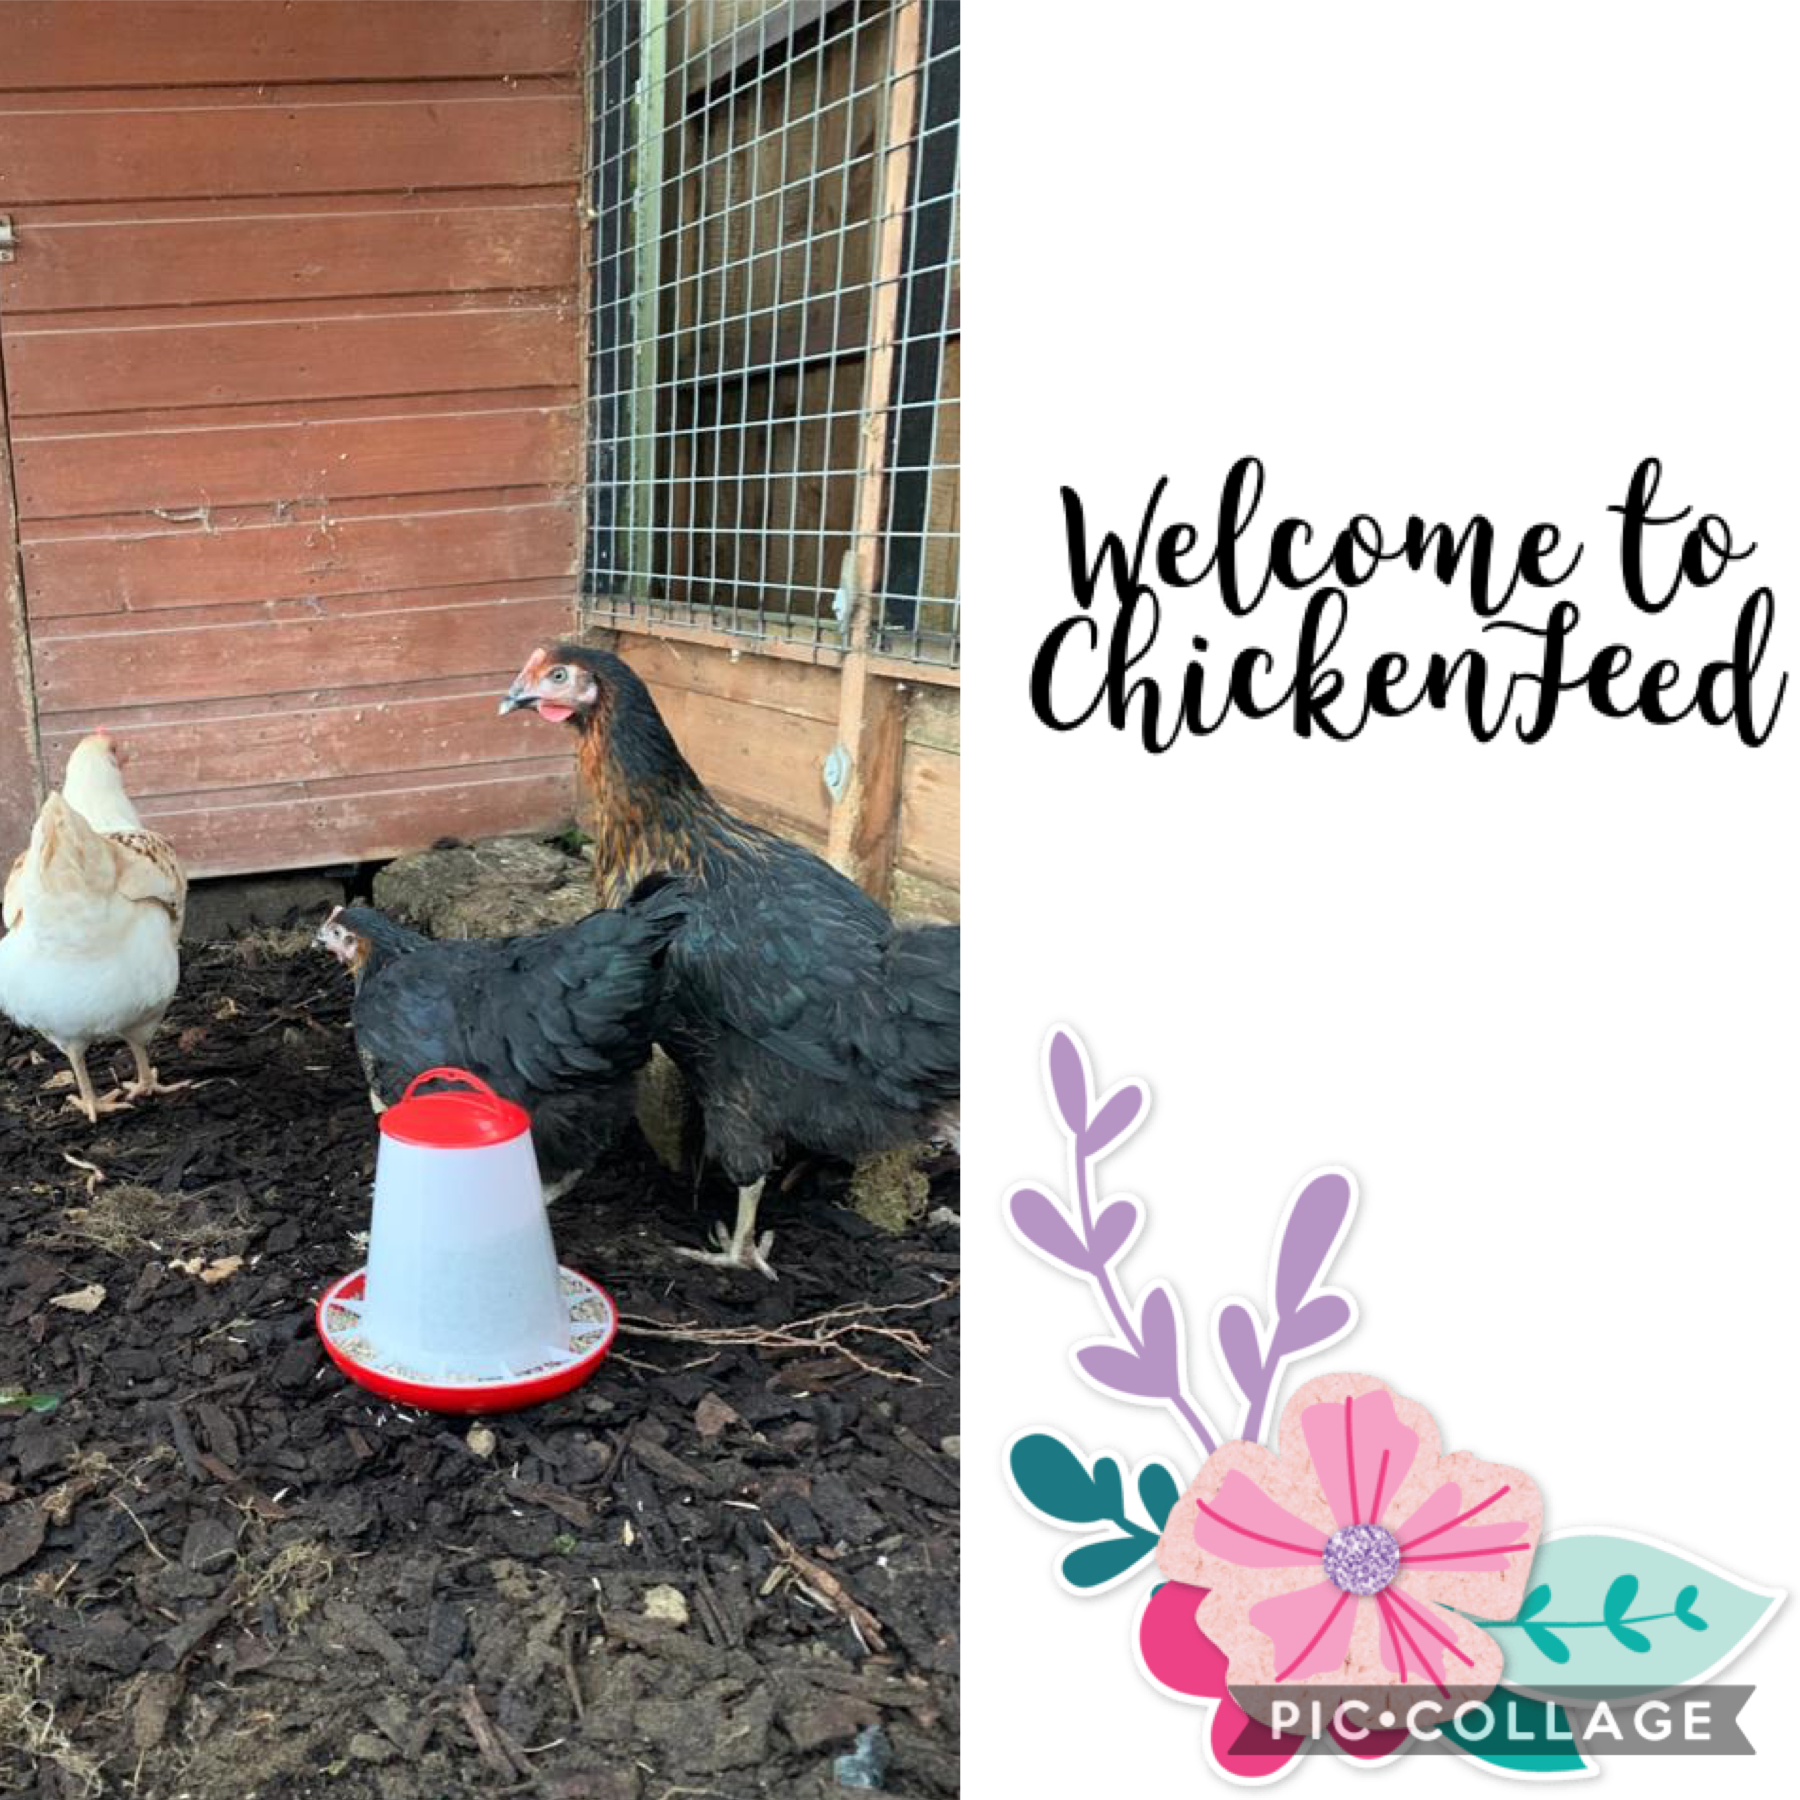 Welcome to ChickenFeed!
